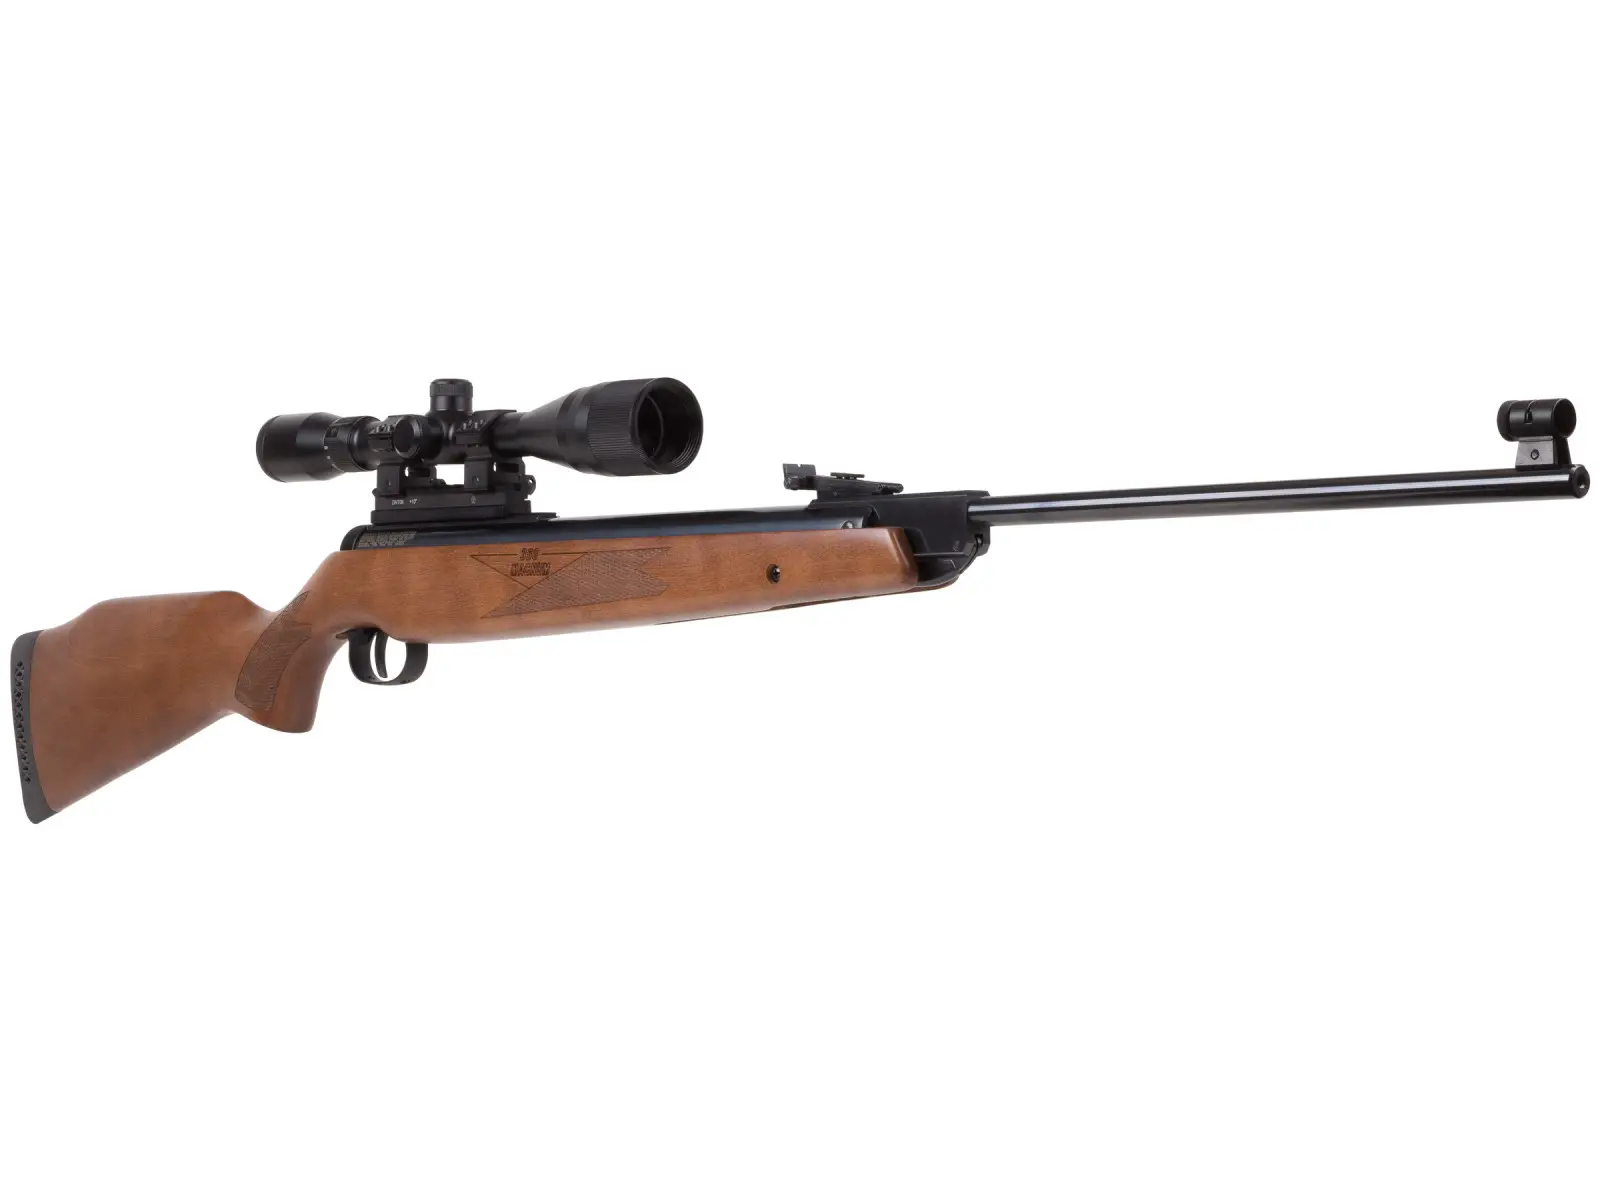 350magnum Best Break Barrel Air Rifle That Hits Like A Champ (Reviews and Buying Guide 2023)